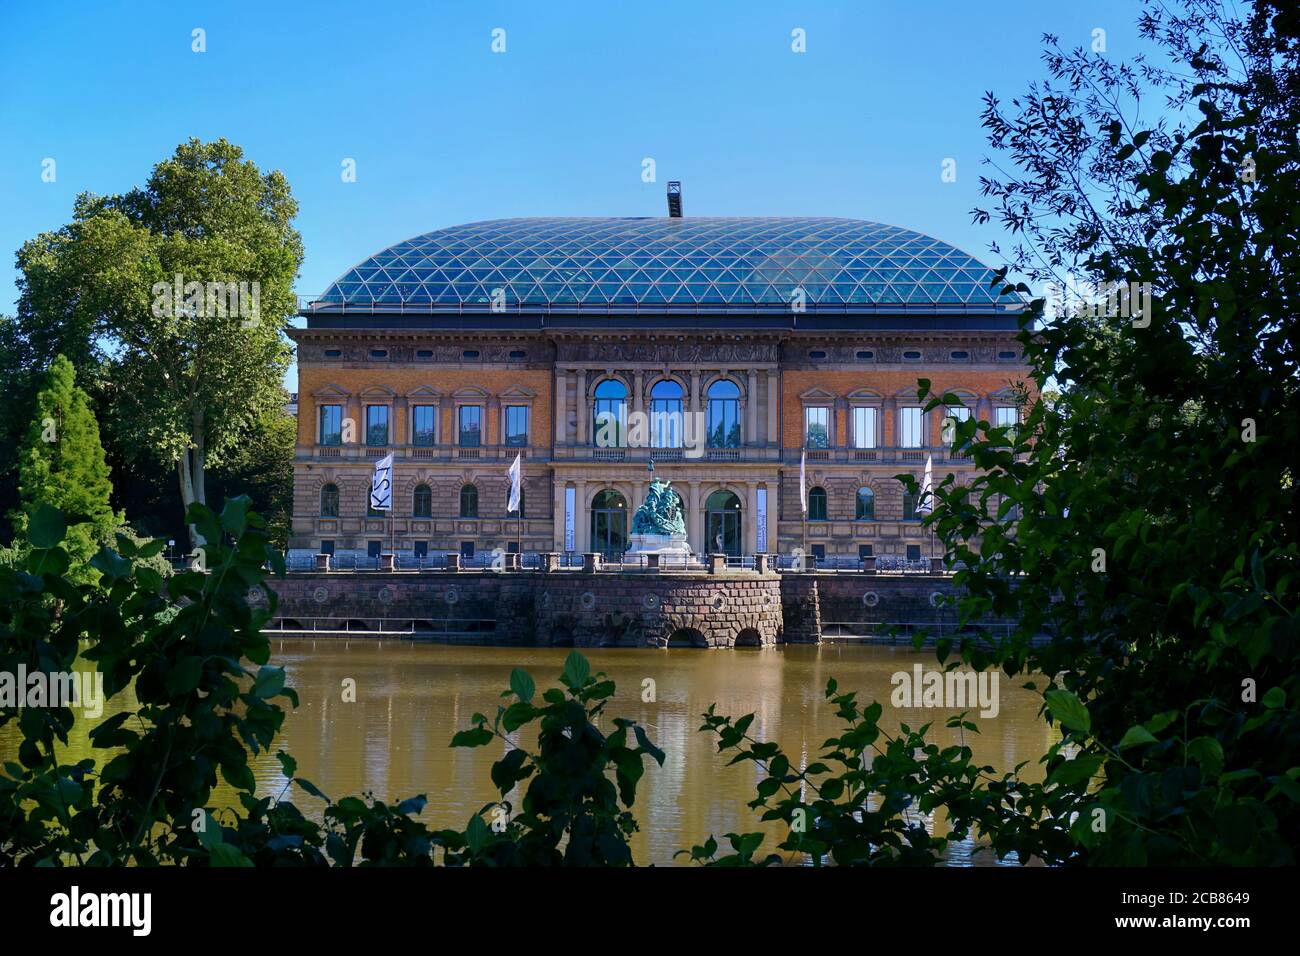 „Ständehaus“, built 1876-1880, at 'Kaiserteich'. It served as a State Parliament from 1949-1988. In 2002, it was turned into the 'K21' museum. Stock Photo